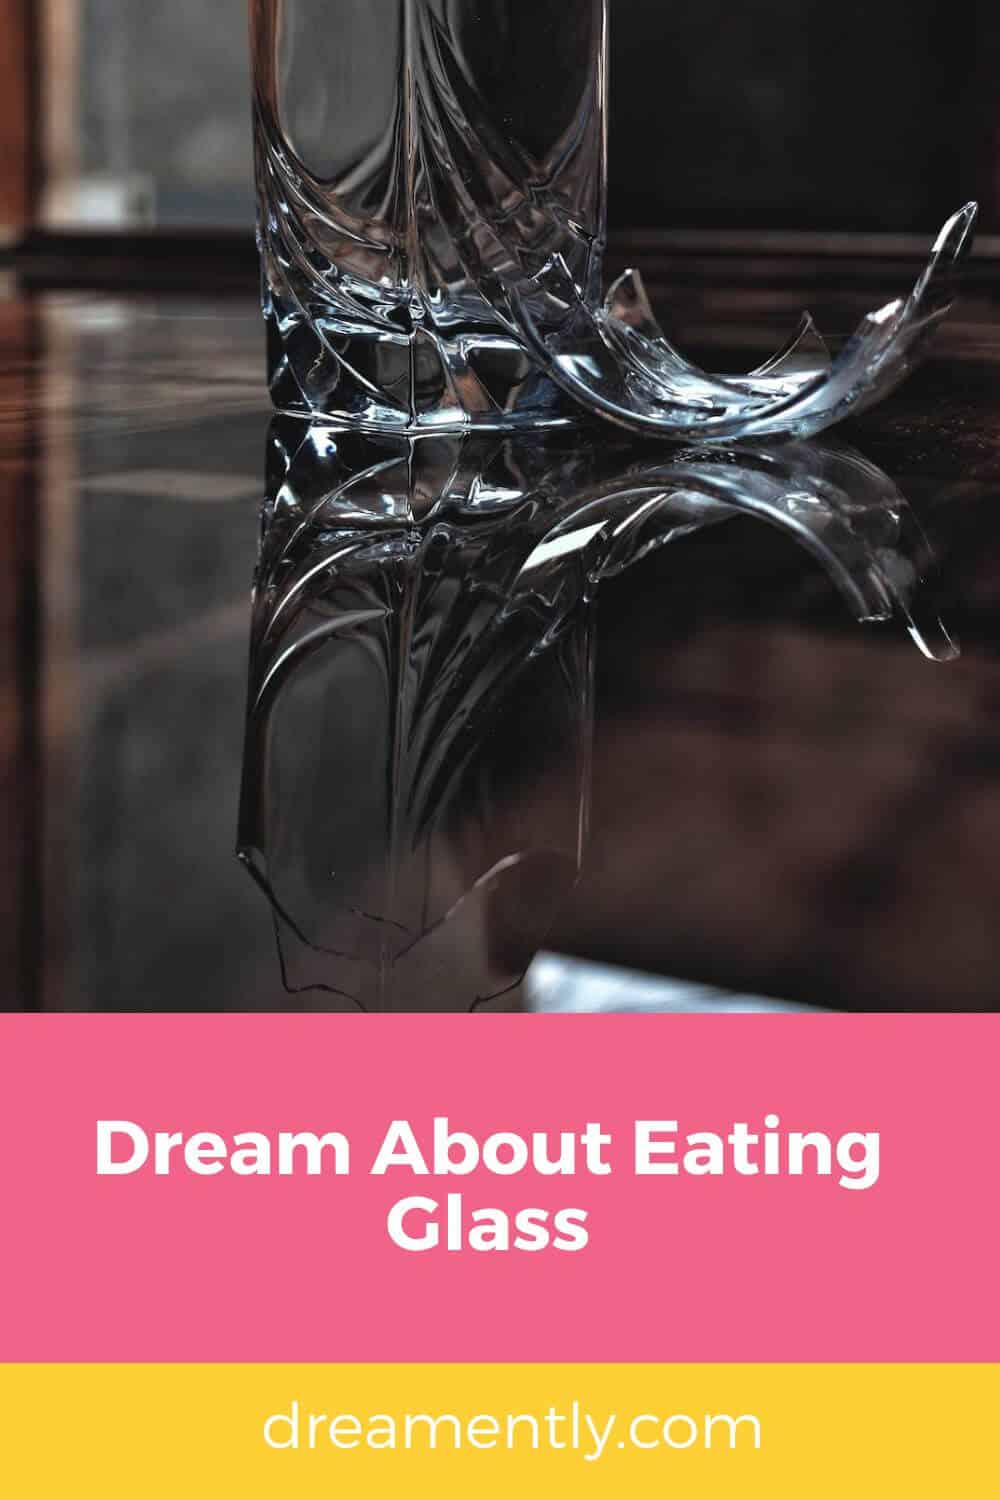 Dream About Eating Glass (1)